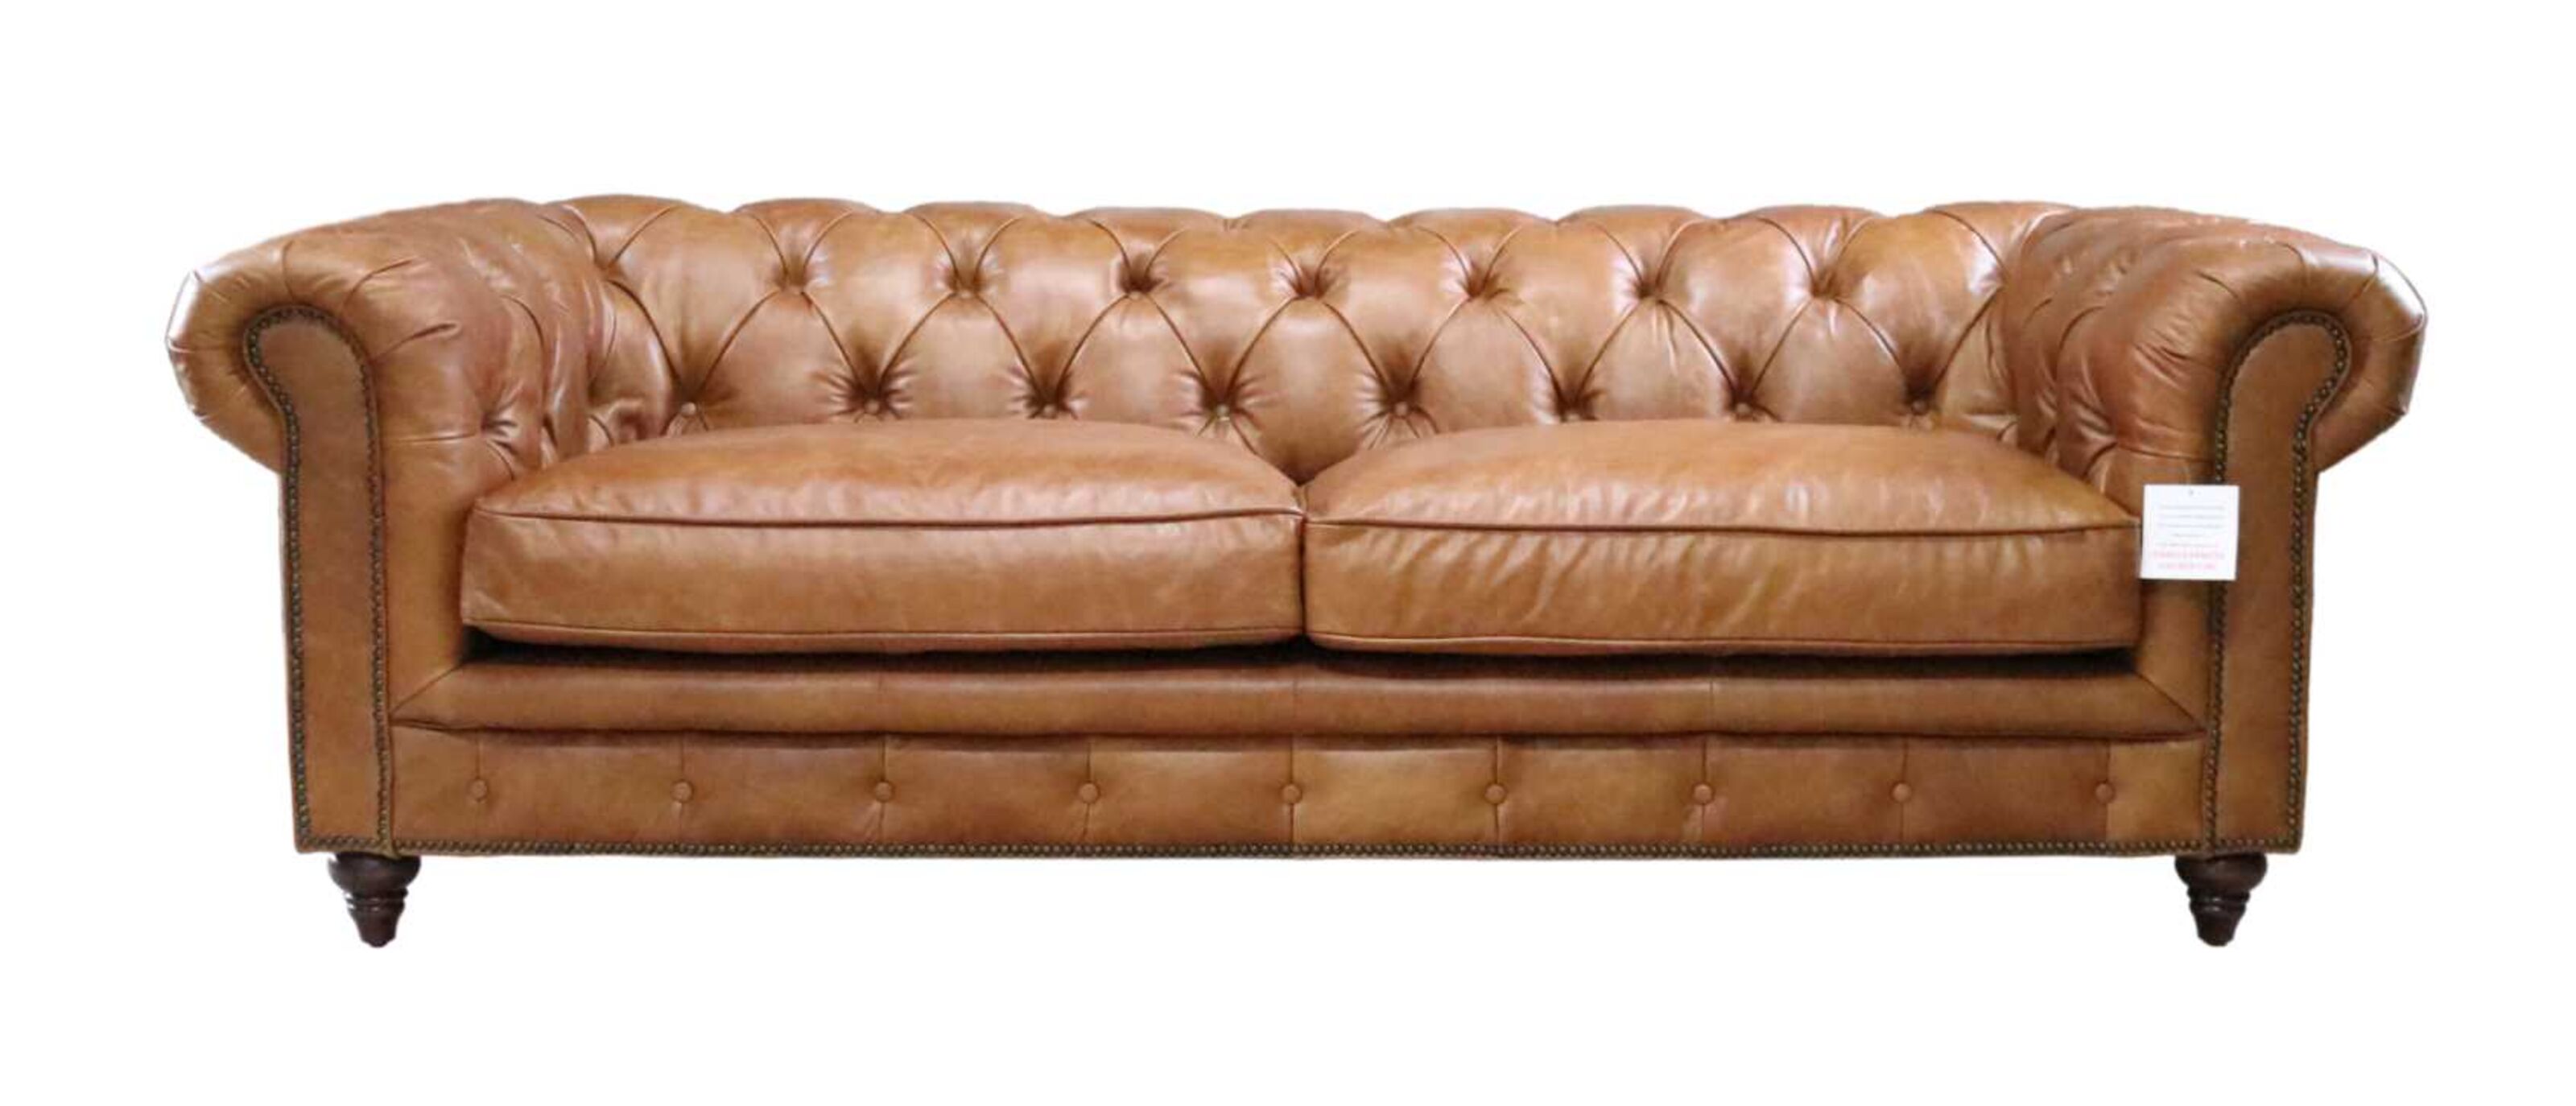 Luxurious Chesterfield Sofas at John Lewis  %Post Title